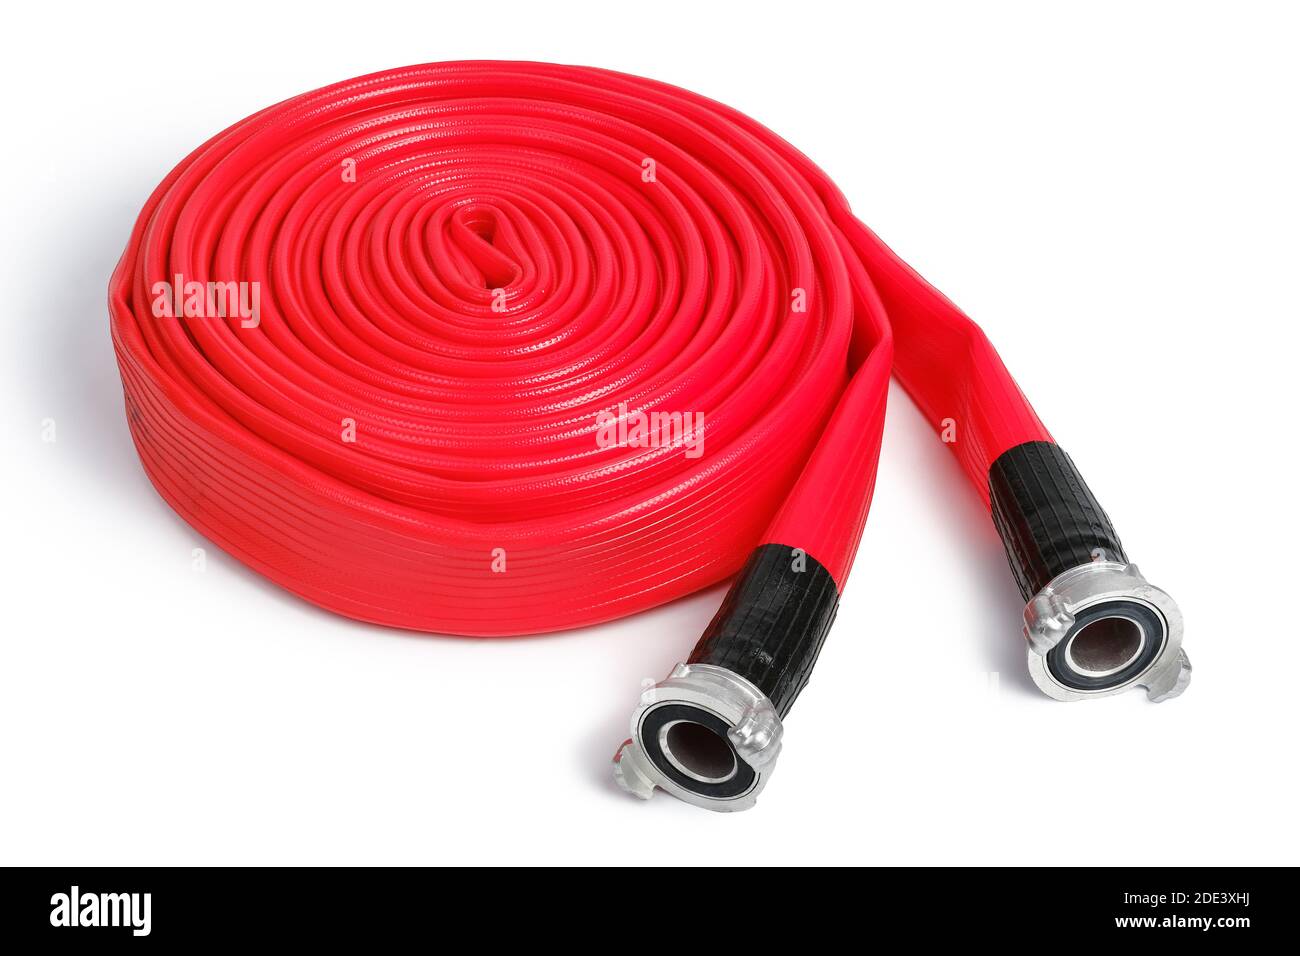 Rolled red fire hose isolated on the white background. Stock Photo